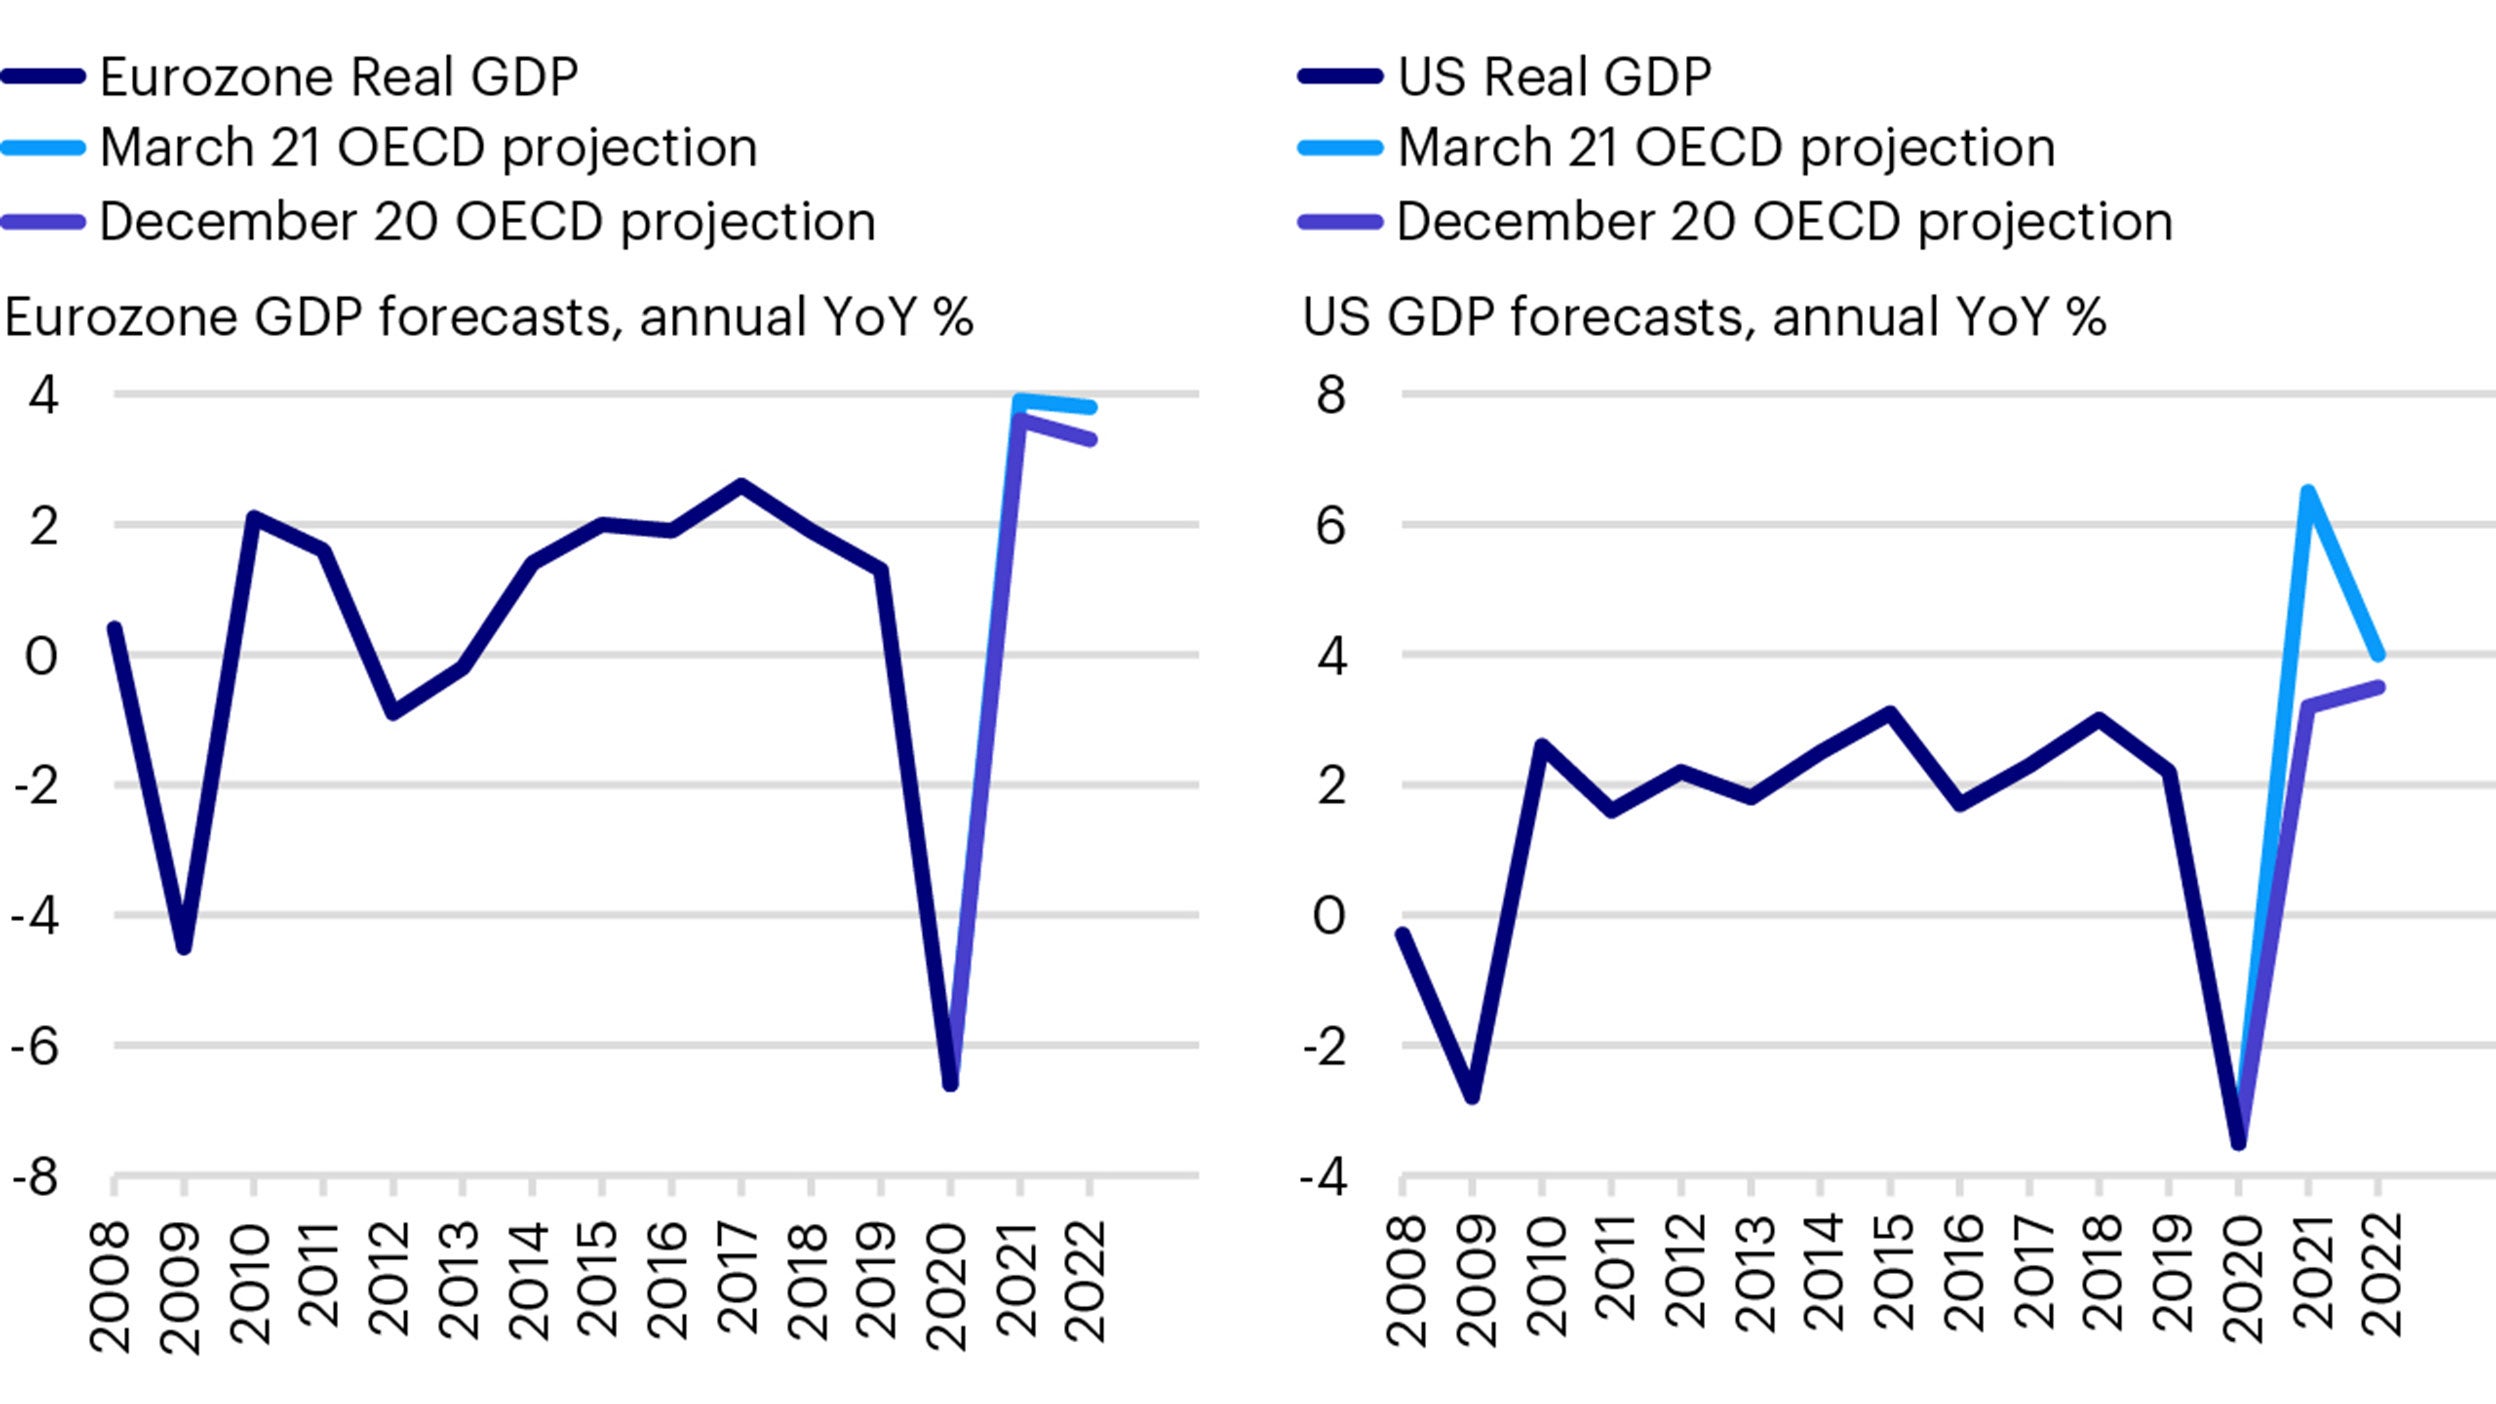 Eurozone and US GDP forecasts